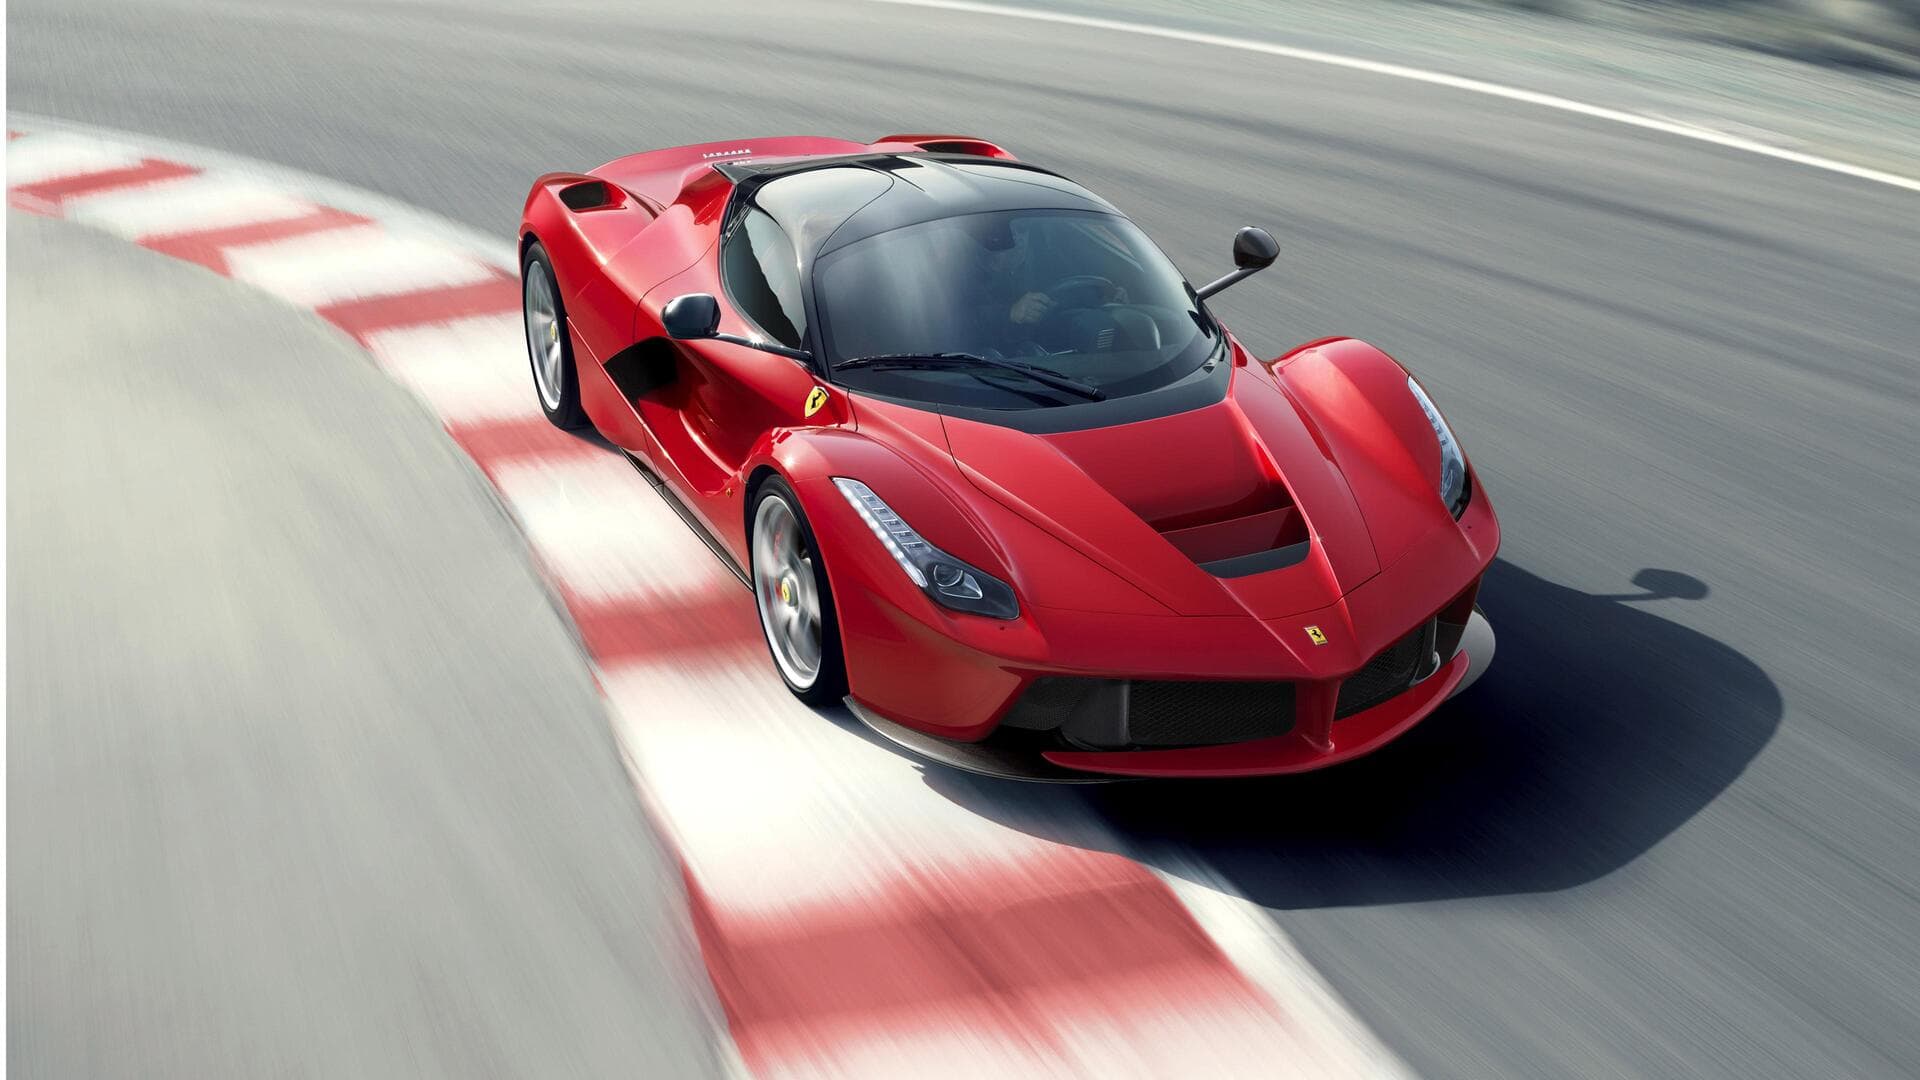 Want spare parts for LaFerrari? Here's how much they cost